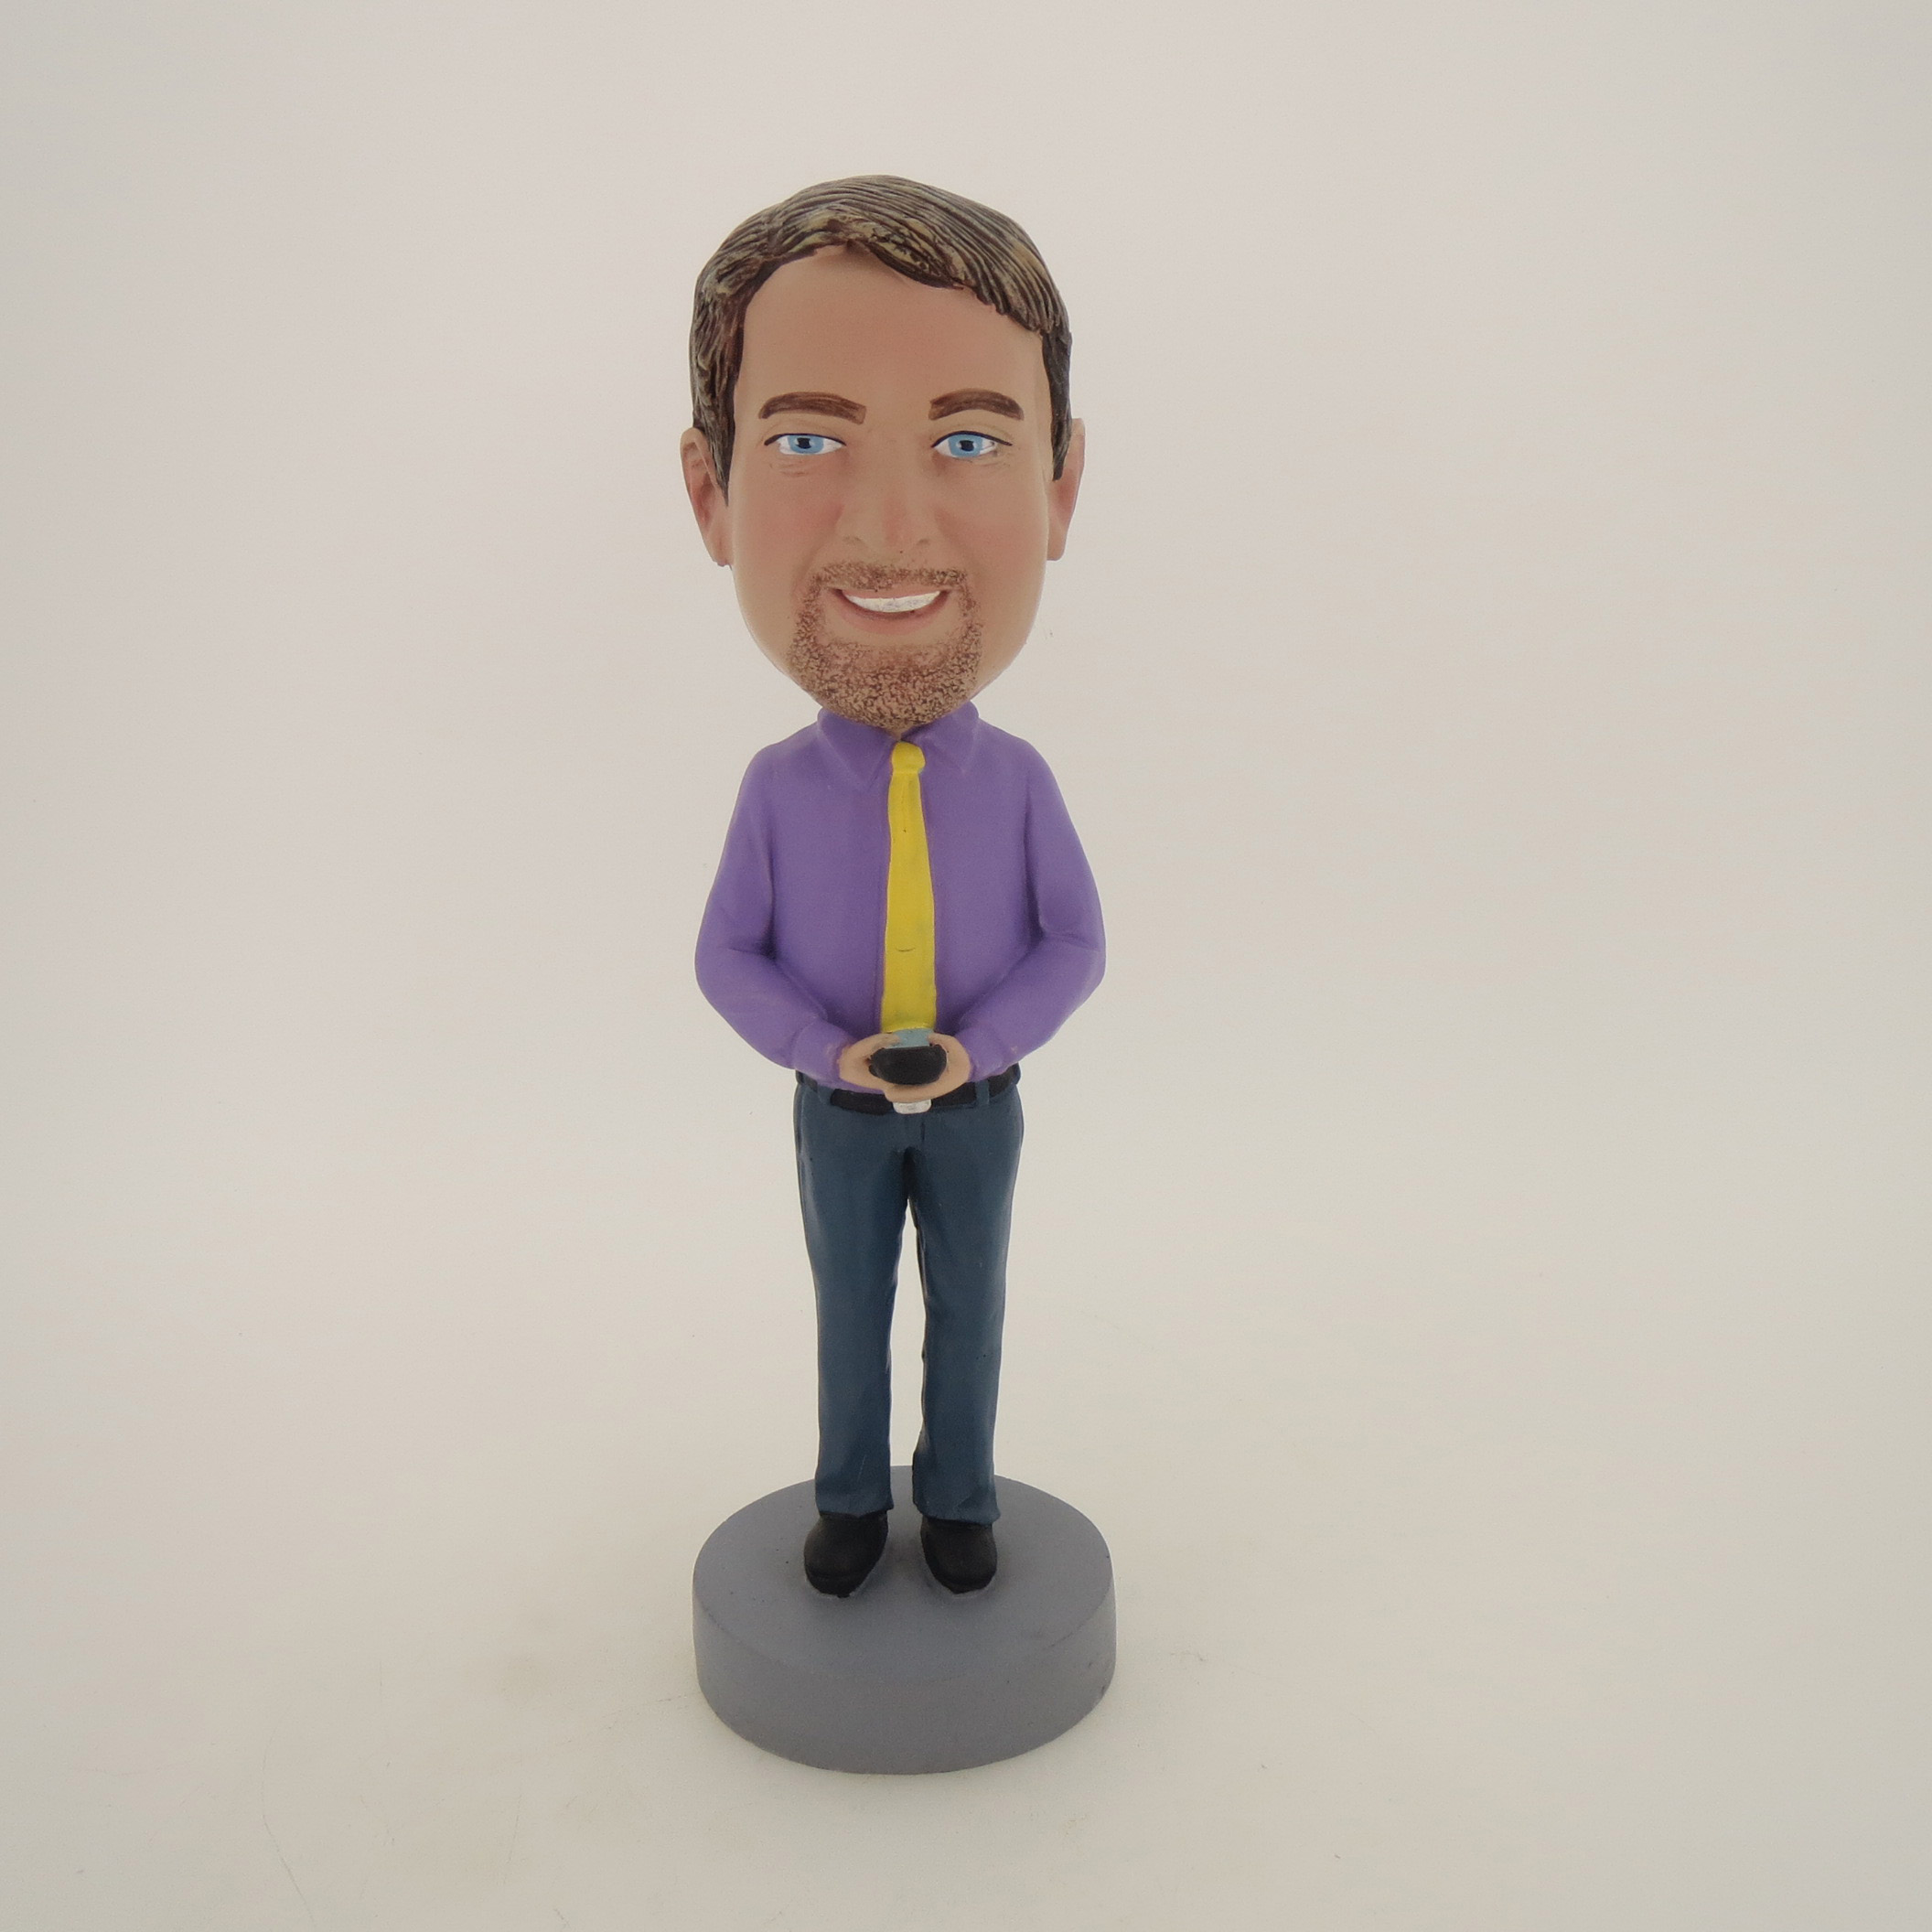 Picture of Custom Bobblehead Doll: Man Holding A Calculator